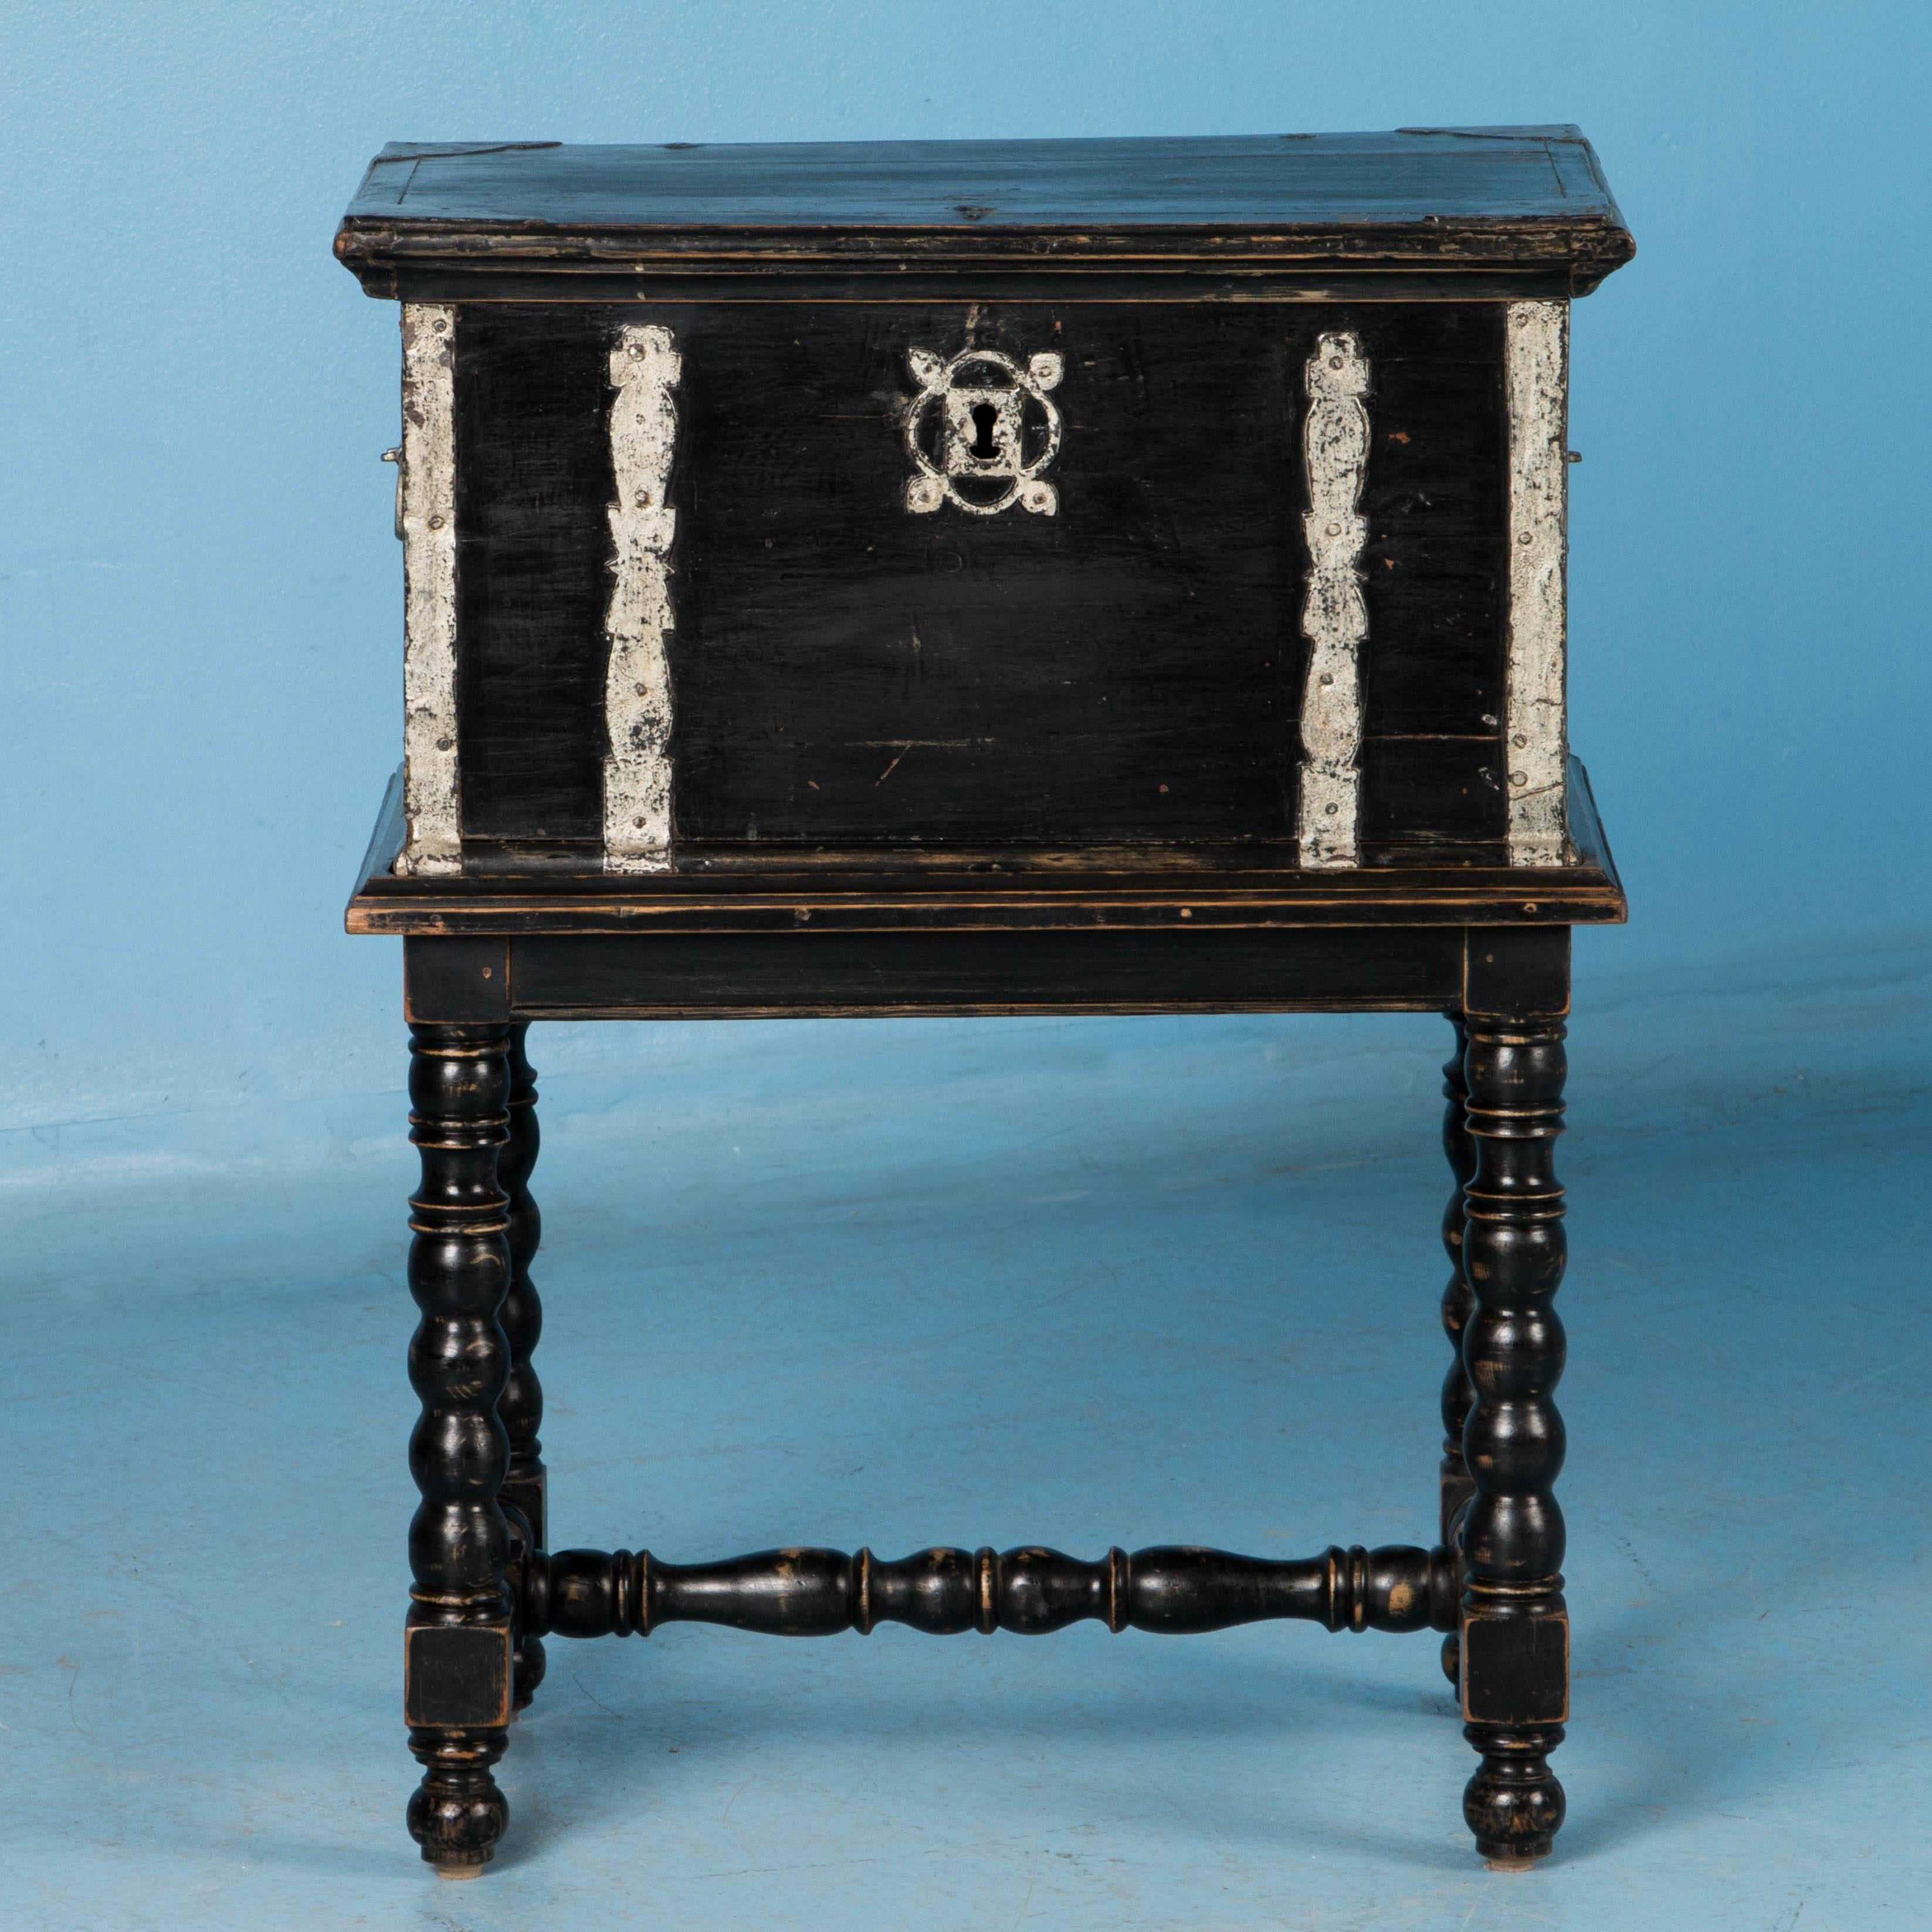 There is a tremendous amount of character packed into a small space in this unique side table. The painted black trunk has wonderful hand-wrought iron work that was painted in an accent color of silver. Boxes reinforced with this type of iron straps